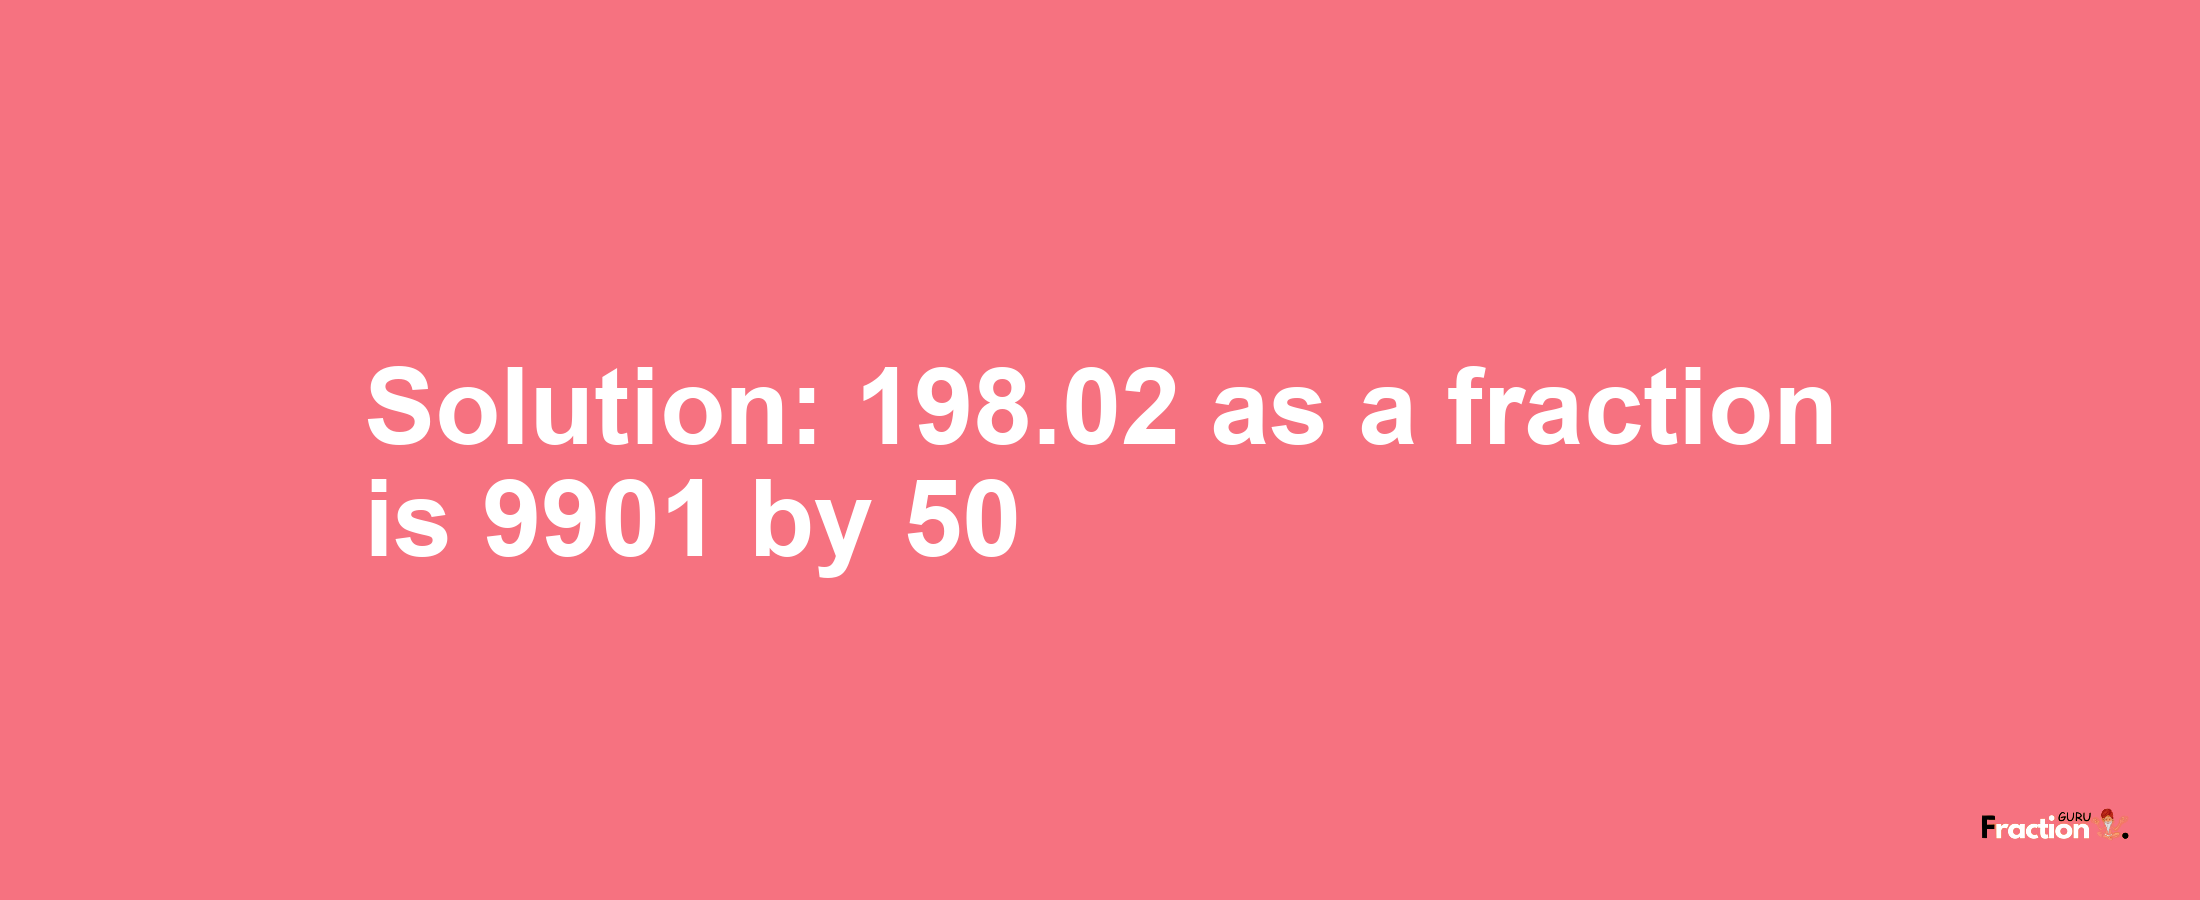 Solution:198.02 as a fraction is 9901/50